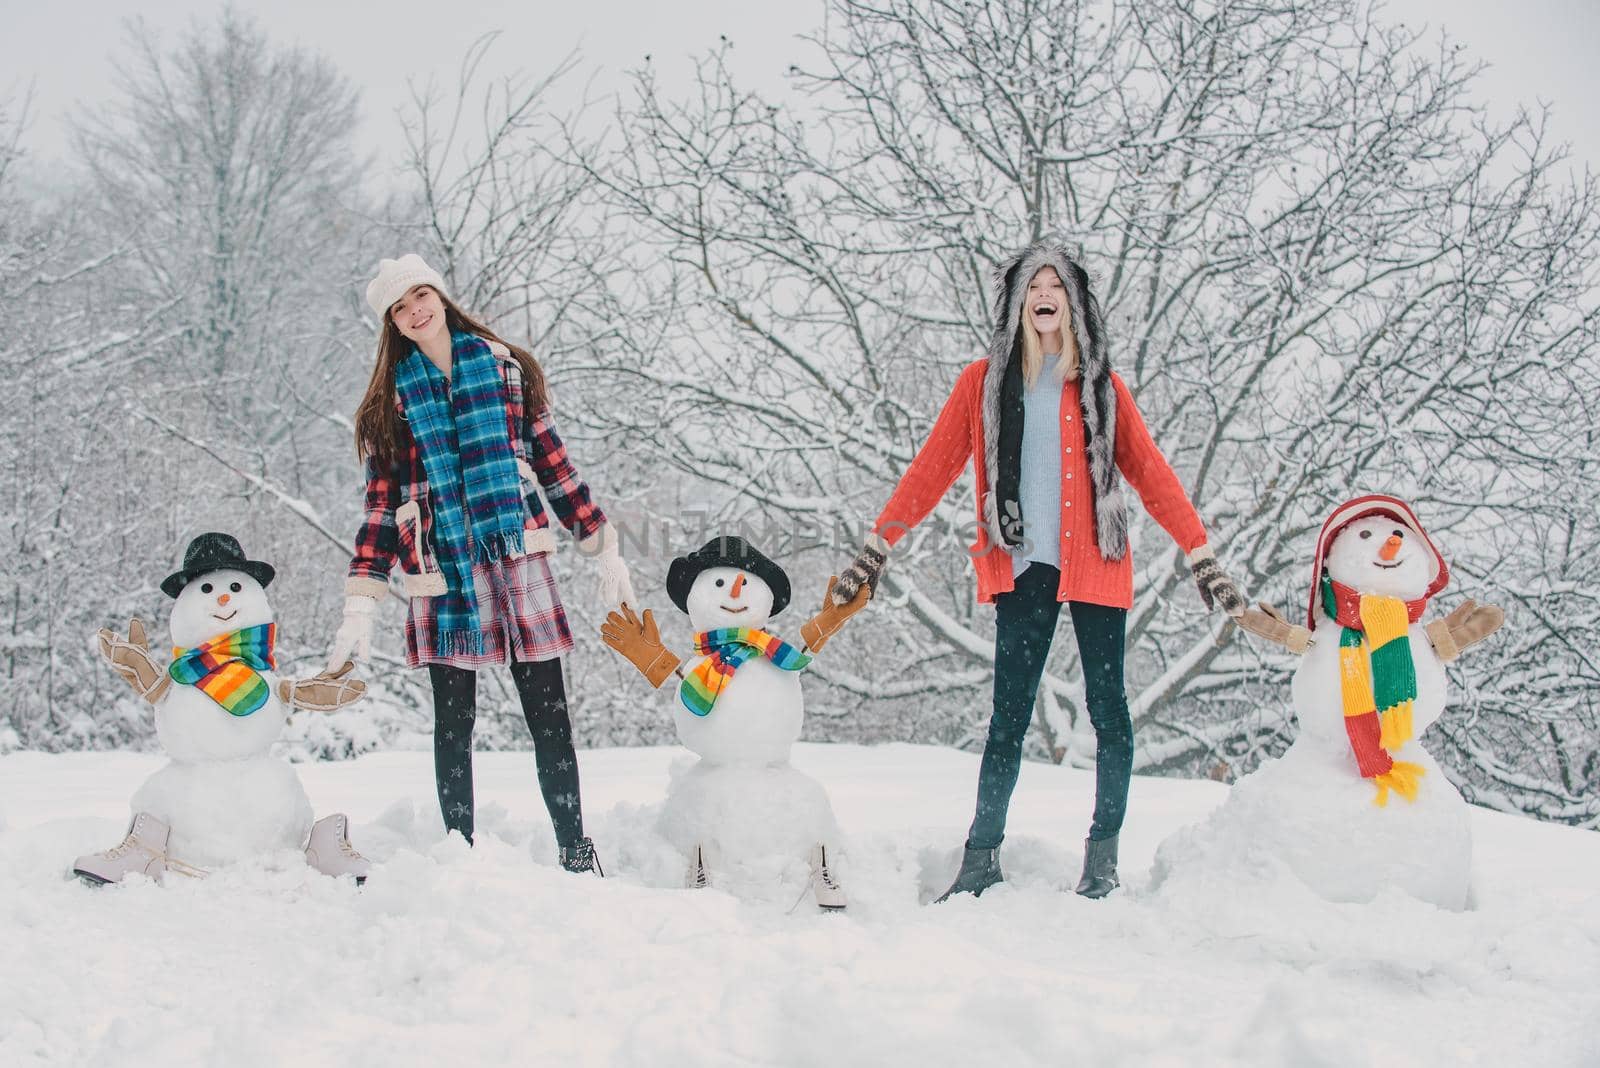 Group of girls with snowman outdoors. Students winter party and Christmas celebration. Two Joyful young women having fun with snowman. Merry Christmas and Happy new year. by Tverdokhlib